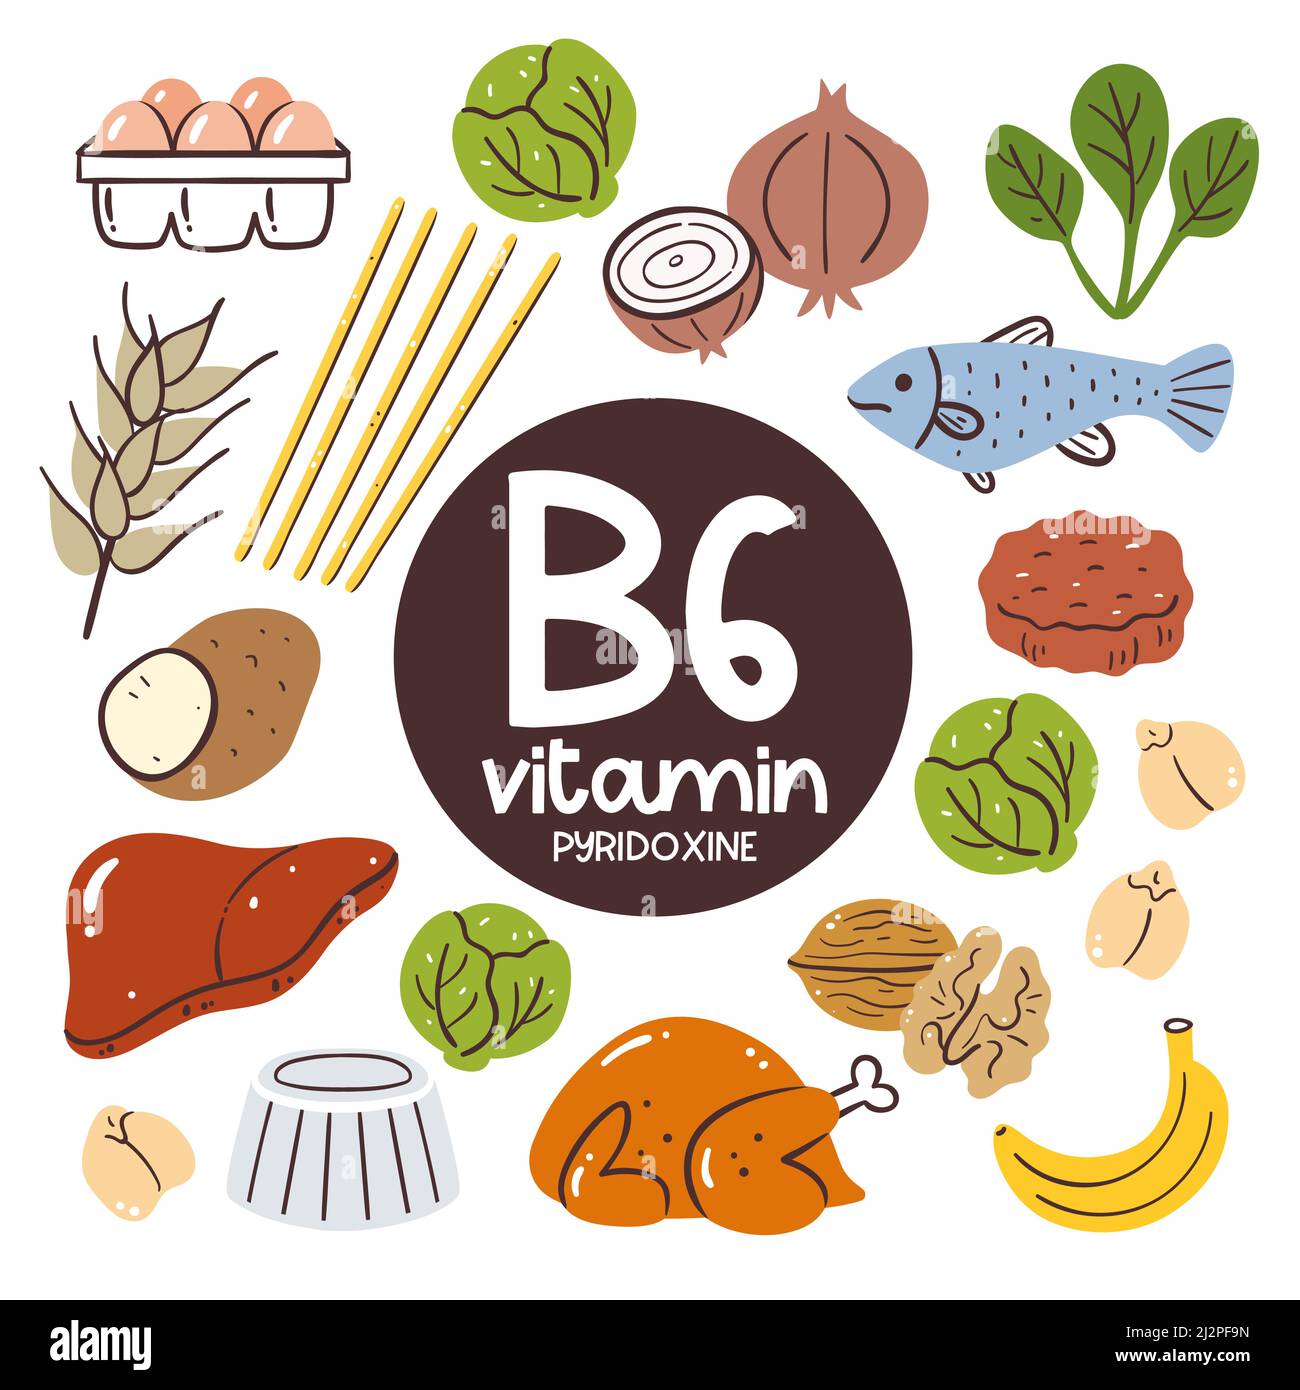 Food products with high level of Vitamin B6 (Pyridoxine). Cooking ingredients. Fruits, vegetables, legumes, grain, fish, meat, pasta, eggs, nuts. Stock Vector